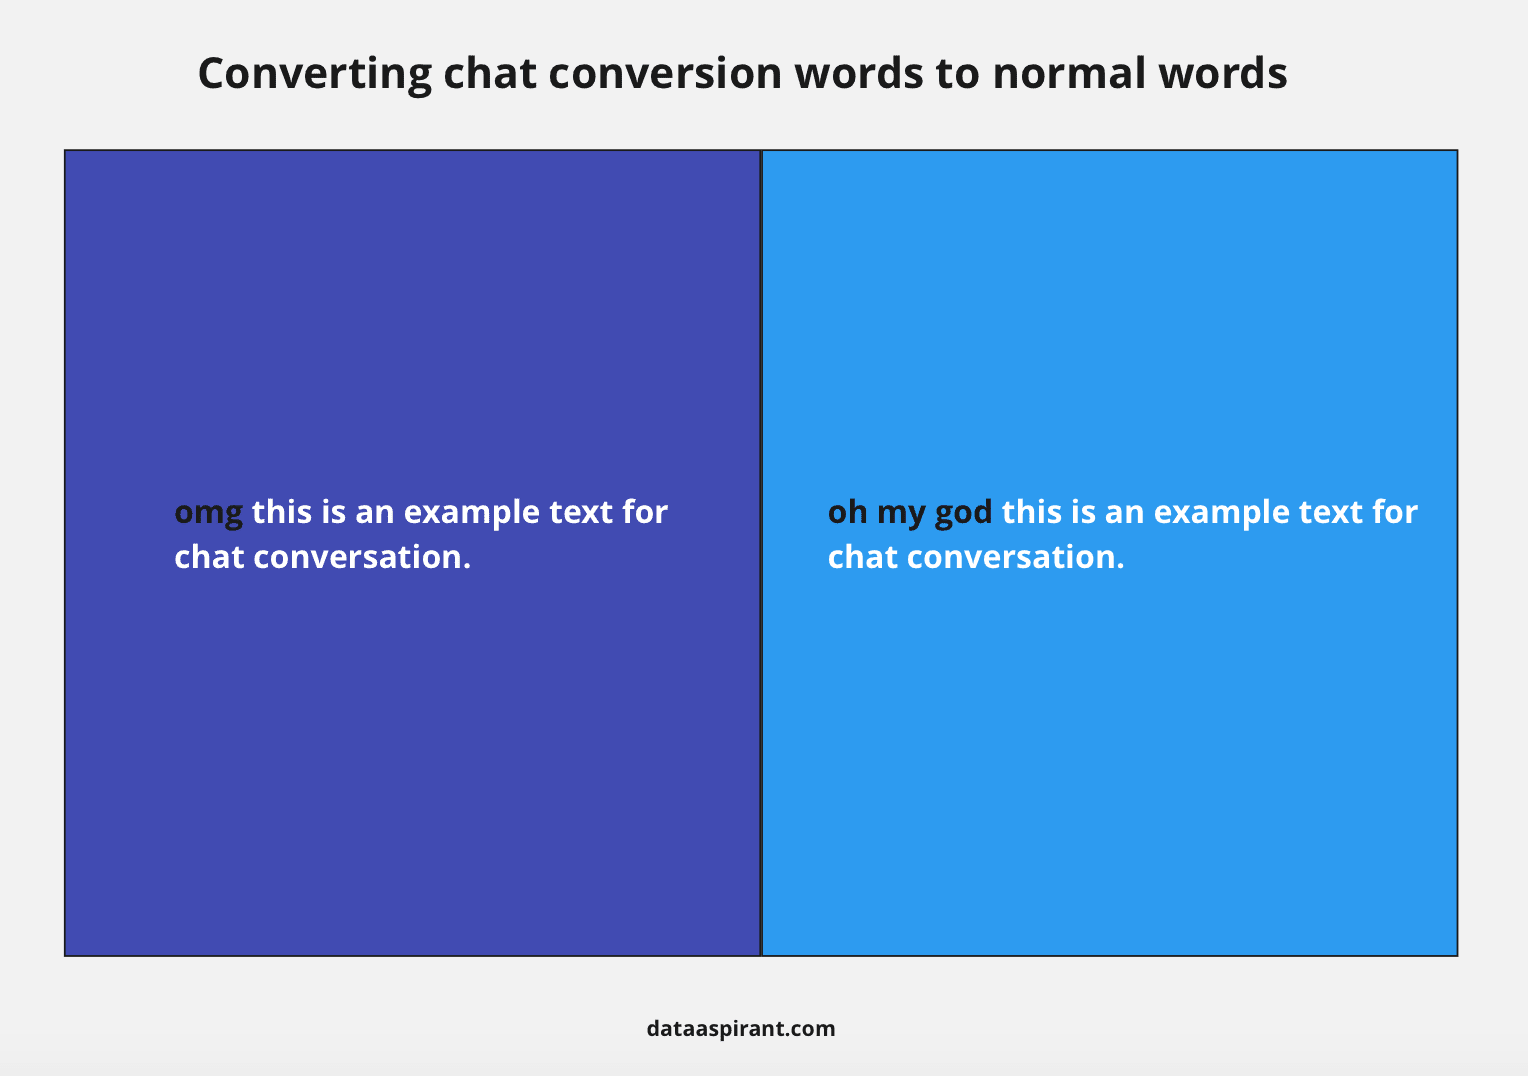 Chat conversion to normal words